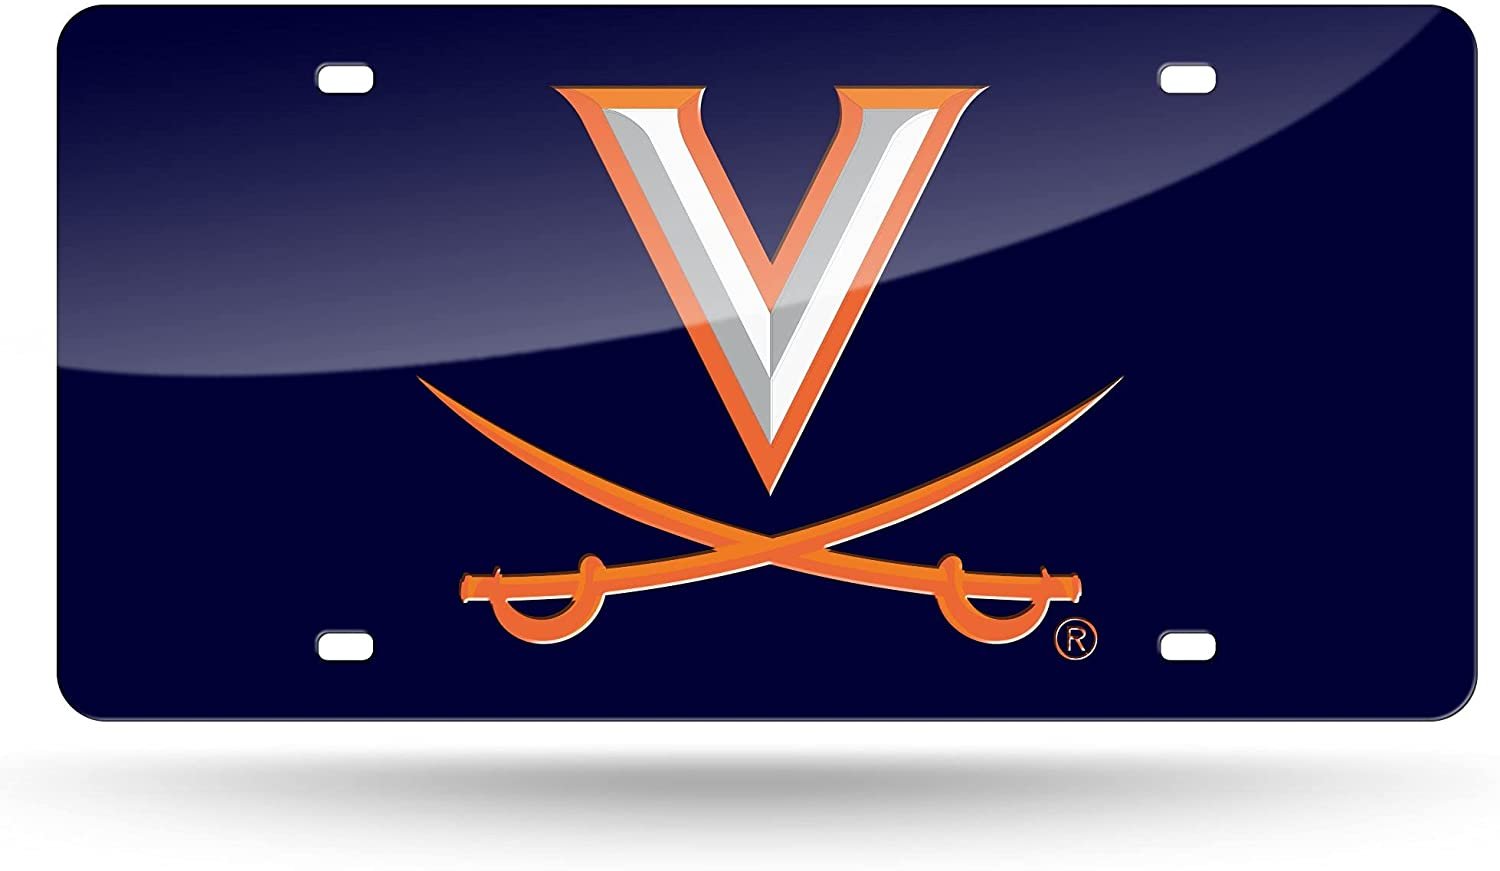 University of Virginia Cavaliers Laser Cut Tag License Plate, Blue, Mirrored Acrylic Inlaid, 12x6 Inch